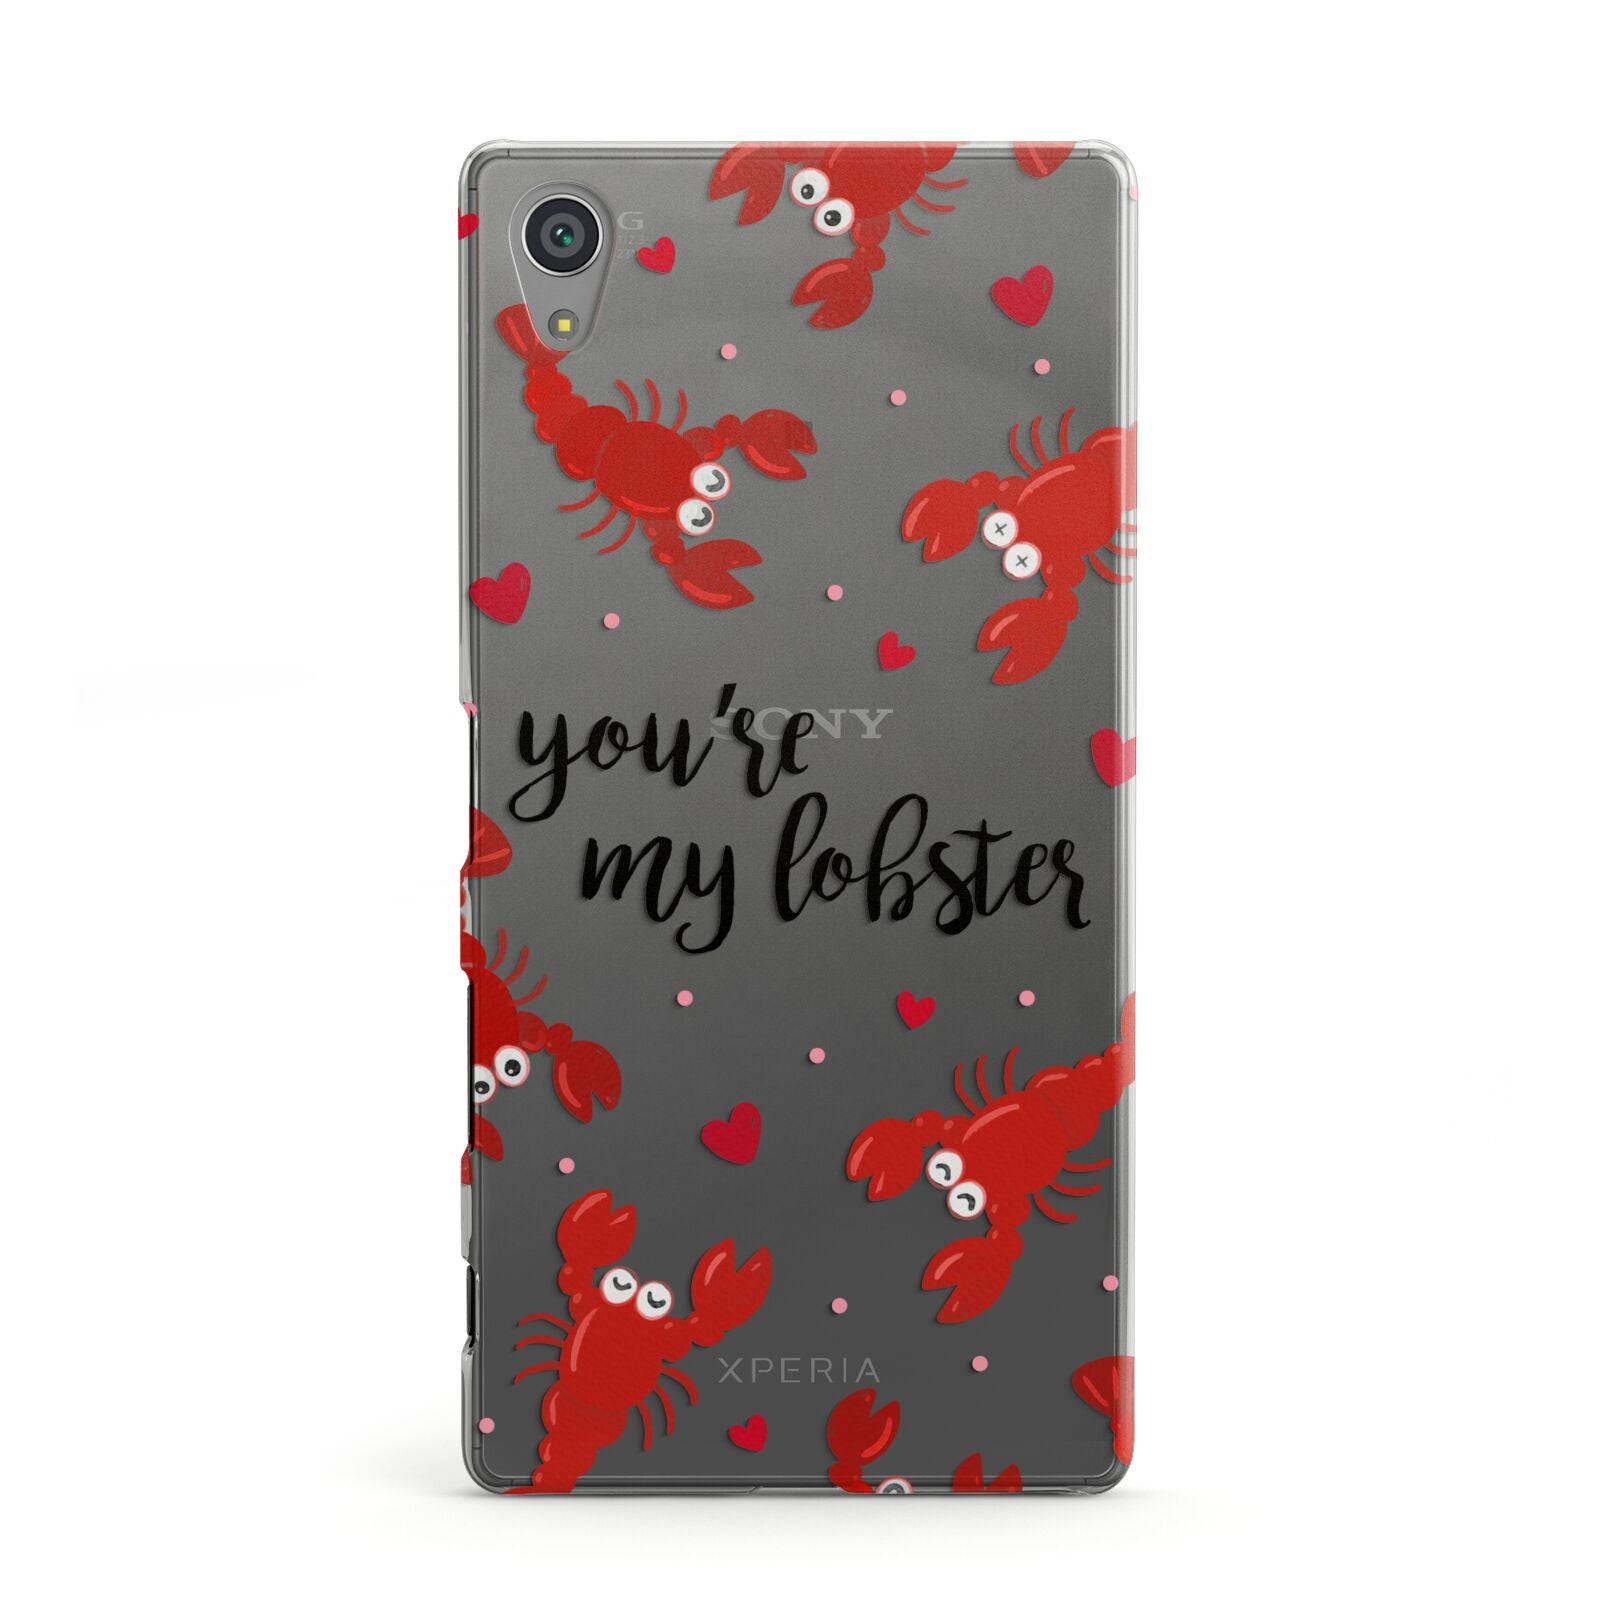 Youre My Lobster Sony Xperia Case